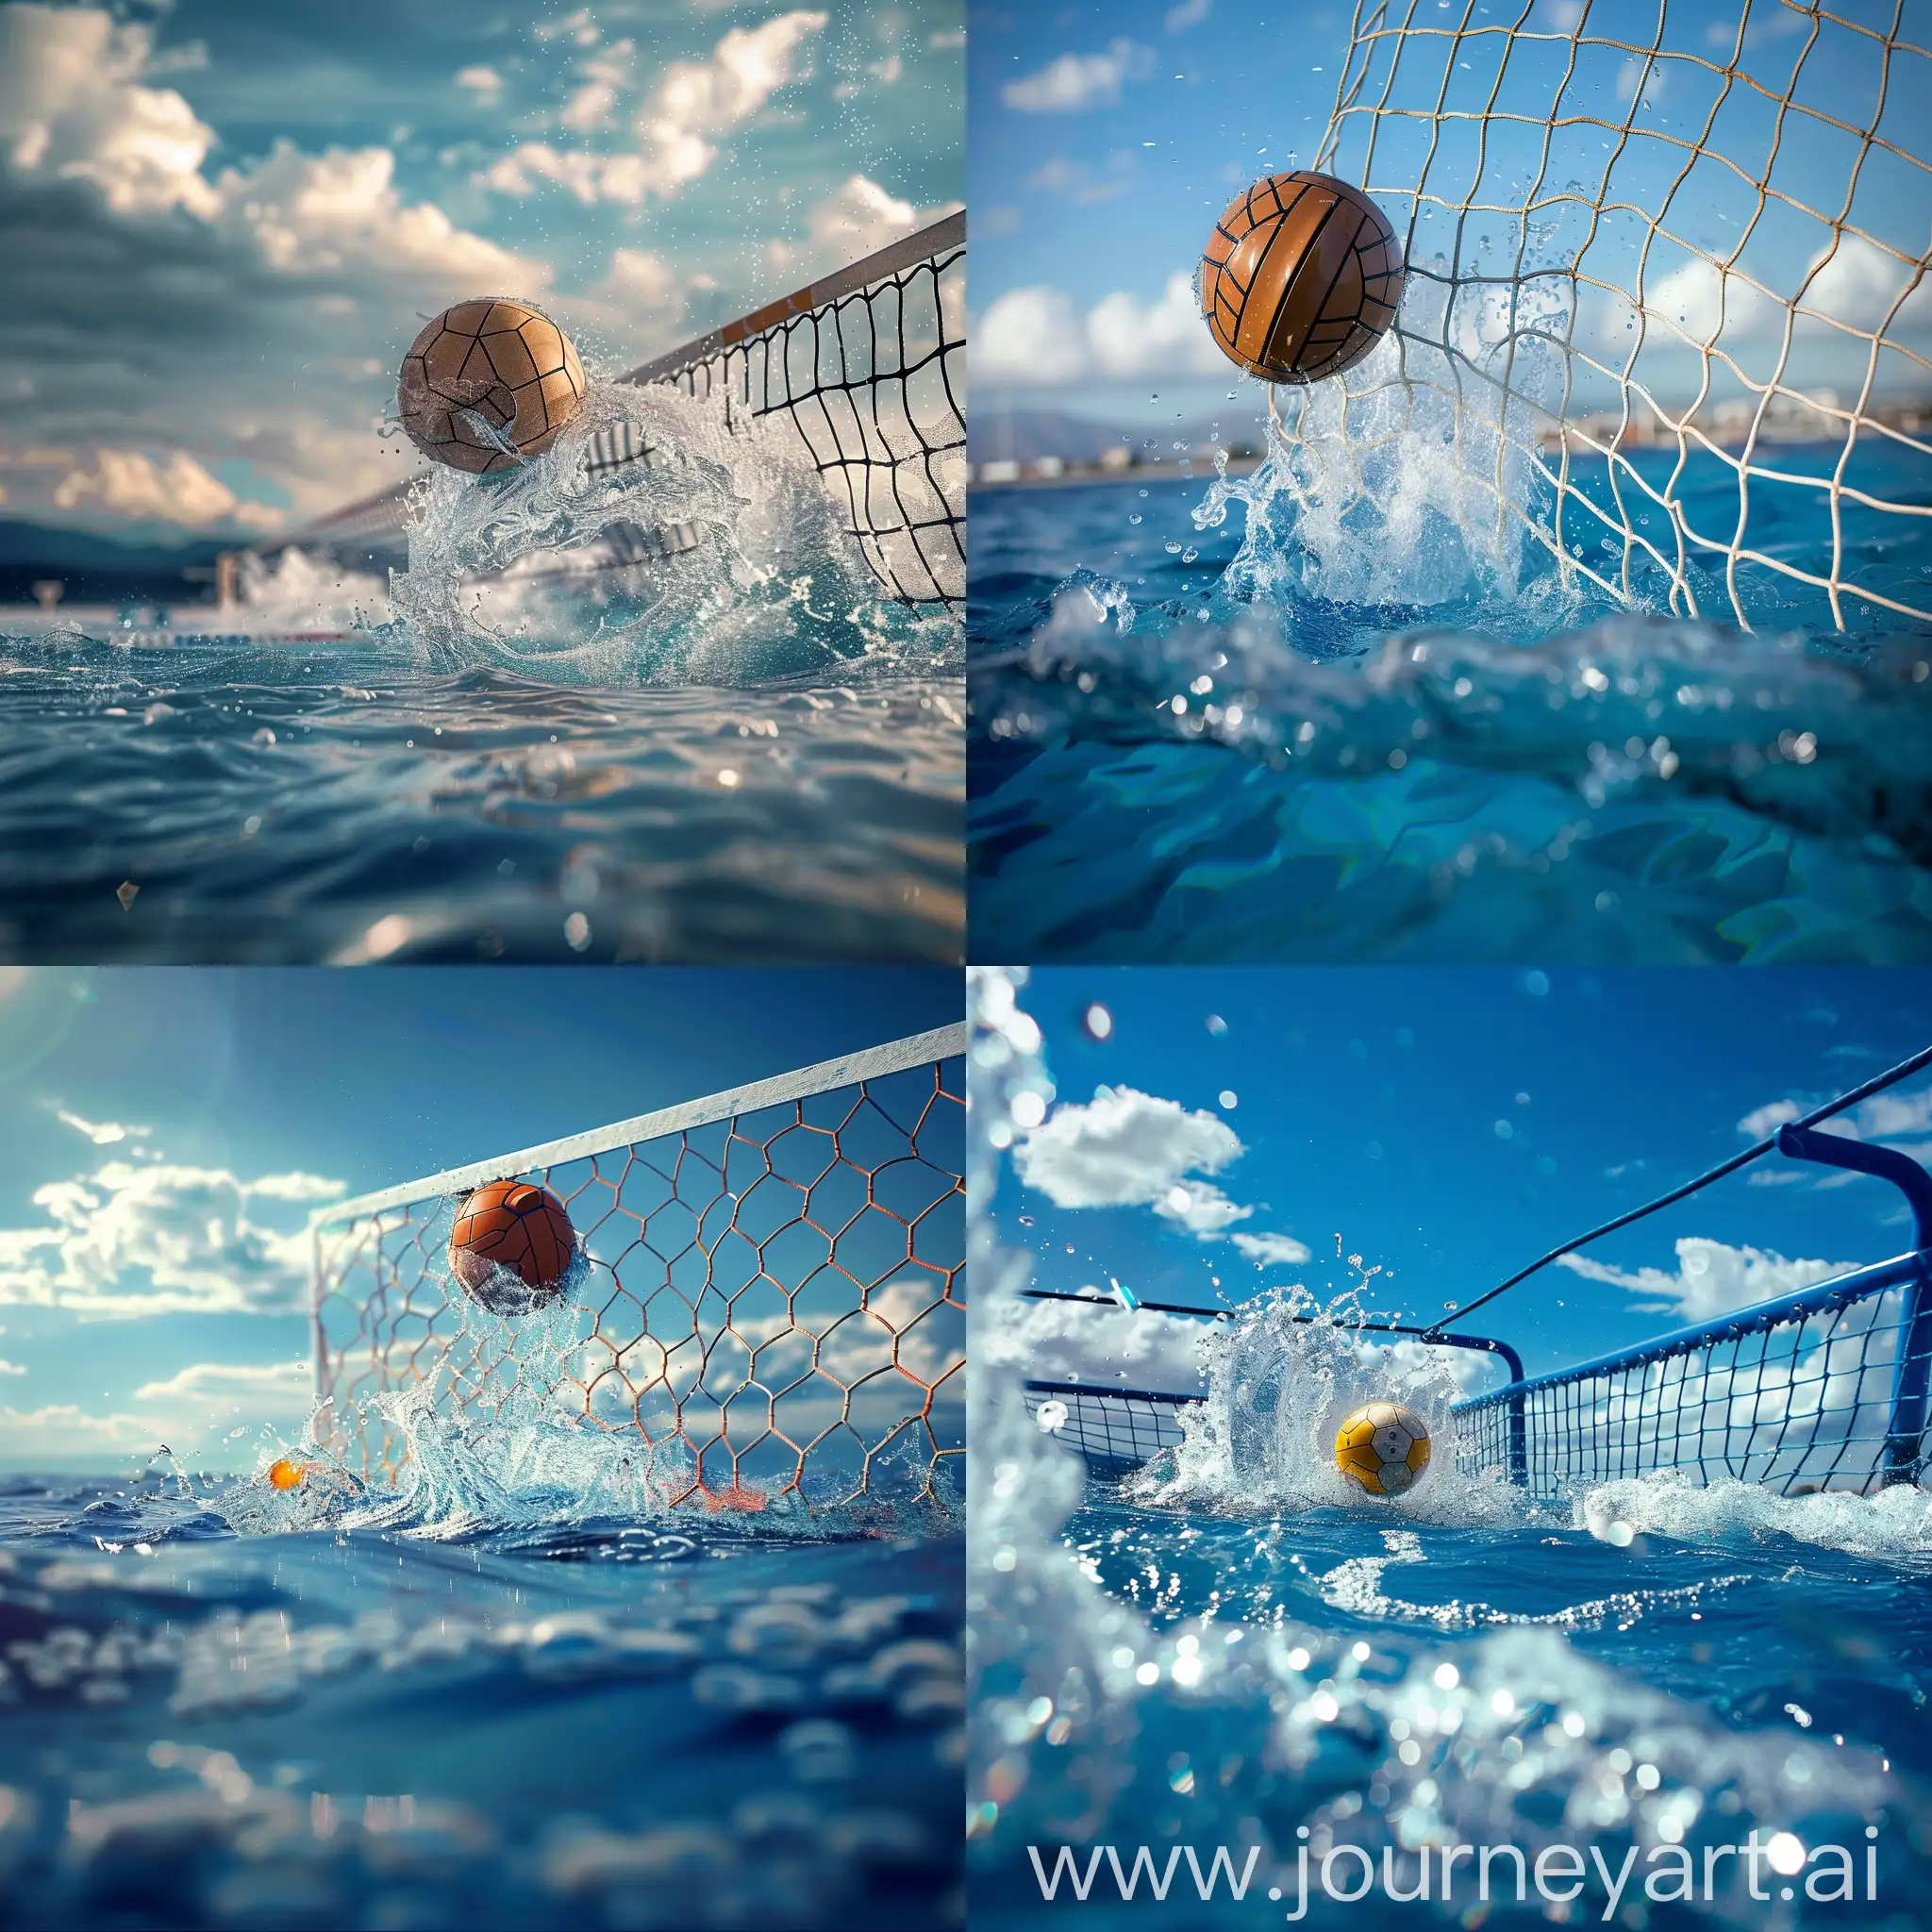 Dynamic-Water-Polo-Goal-Moment-Captured-in-Realistic-Image